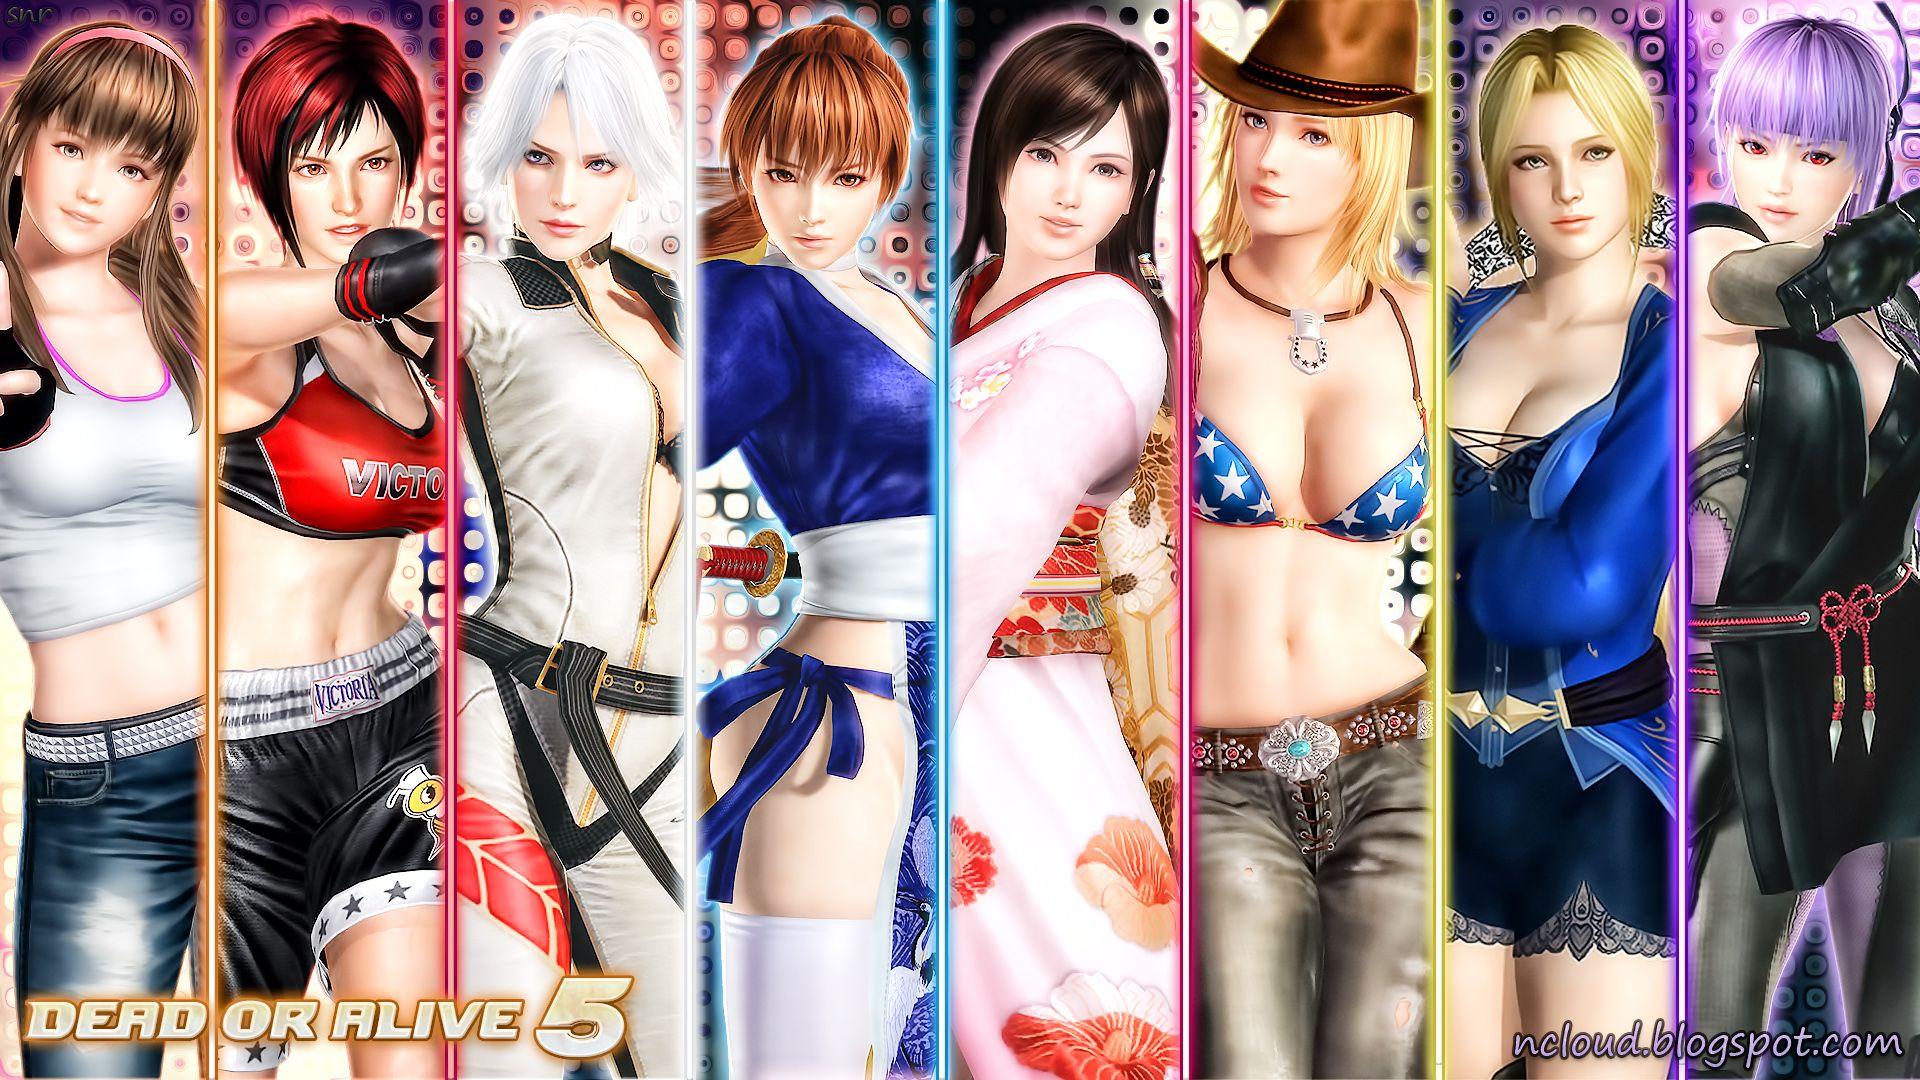 Dead Or Alive 5 Wallpapers Wallpapers.